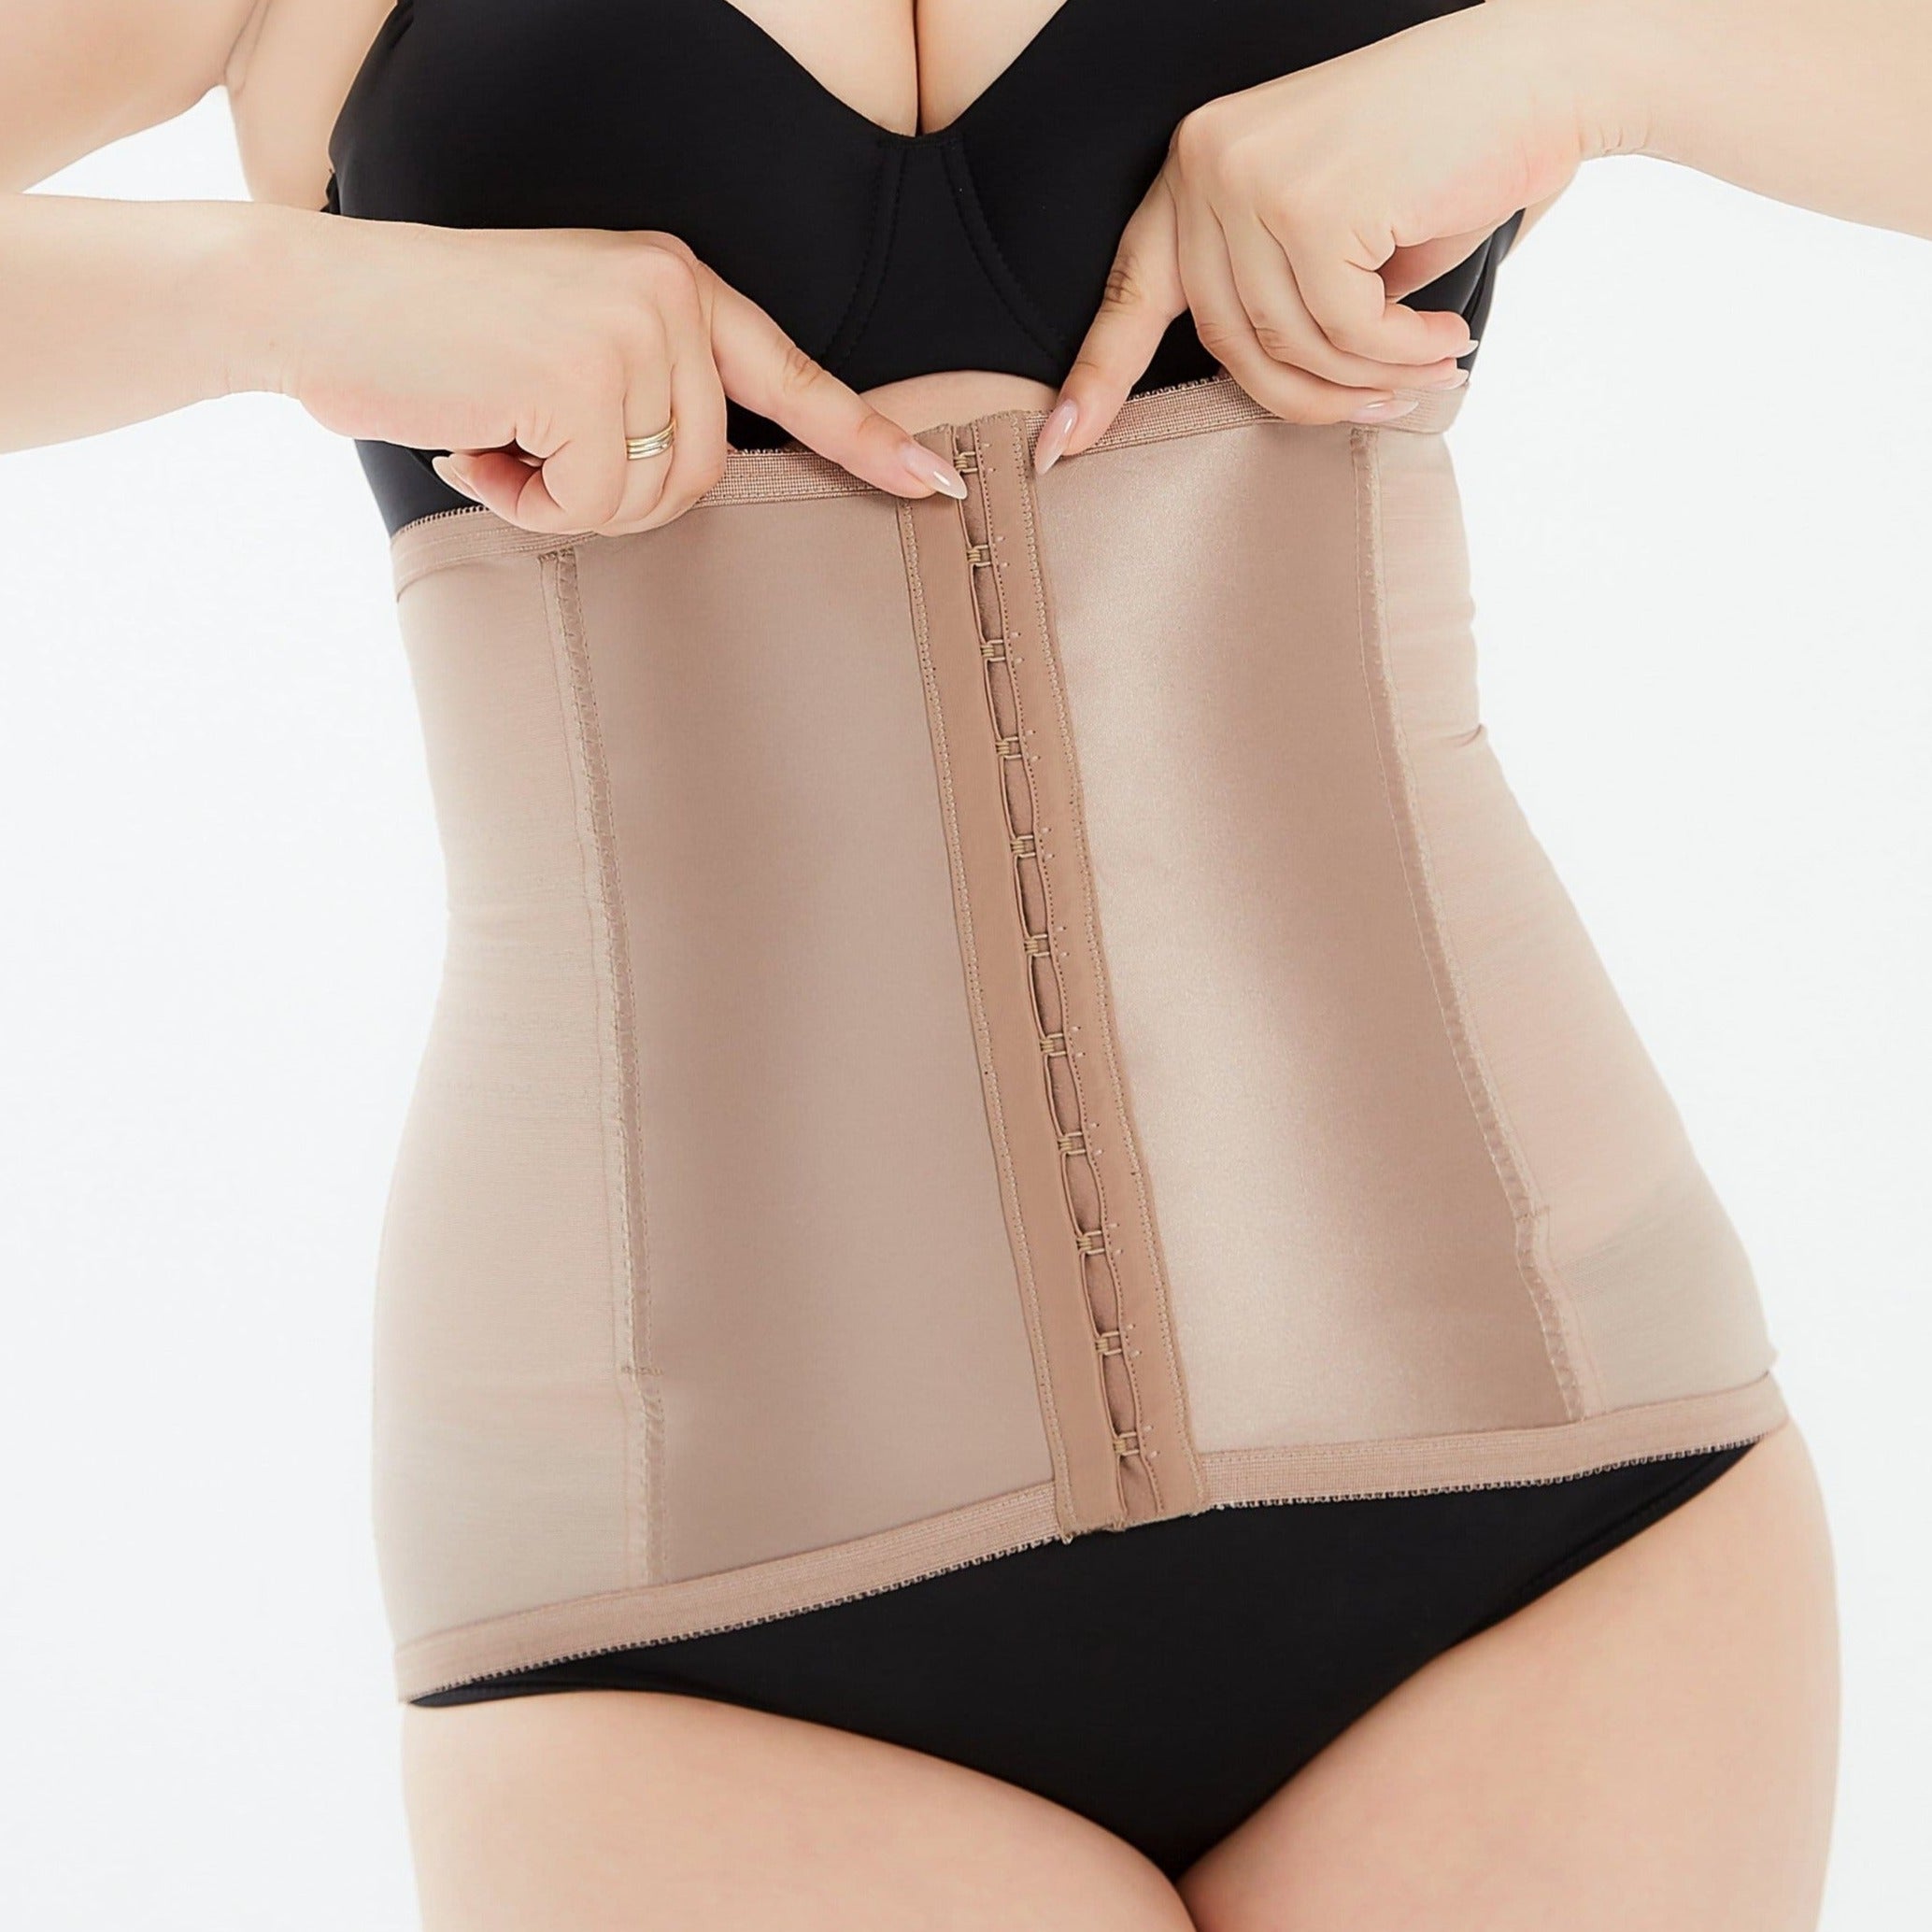 Corset belt for weight loss and body shaping - Romania, New - The